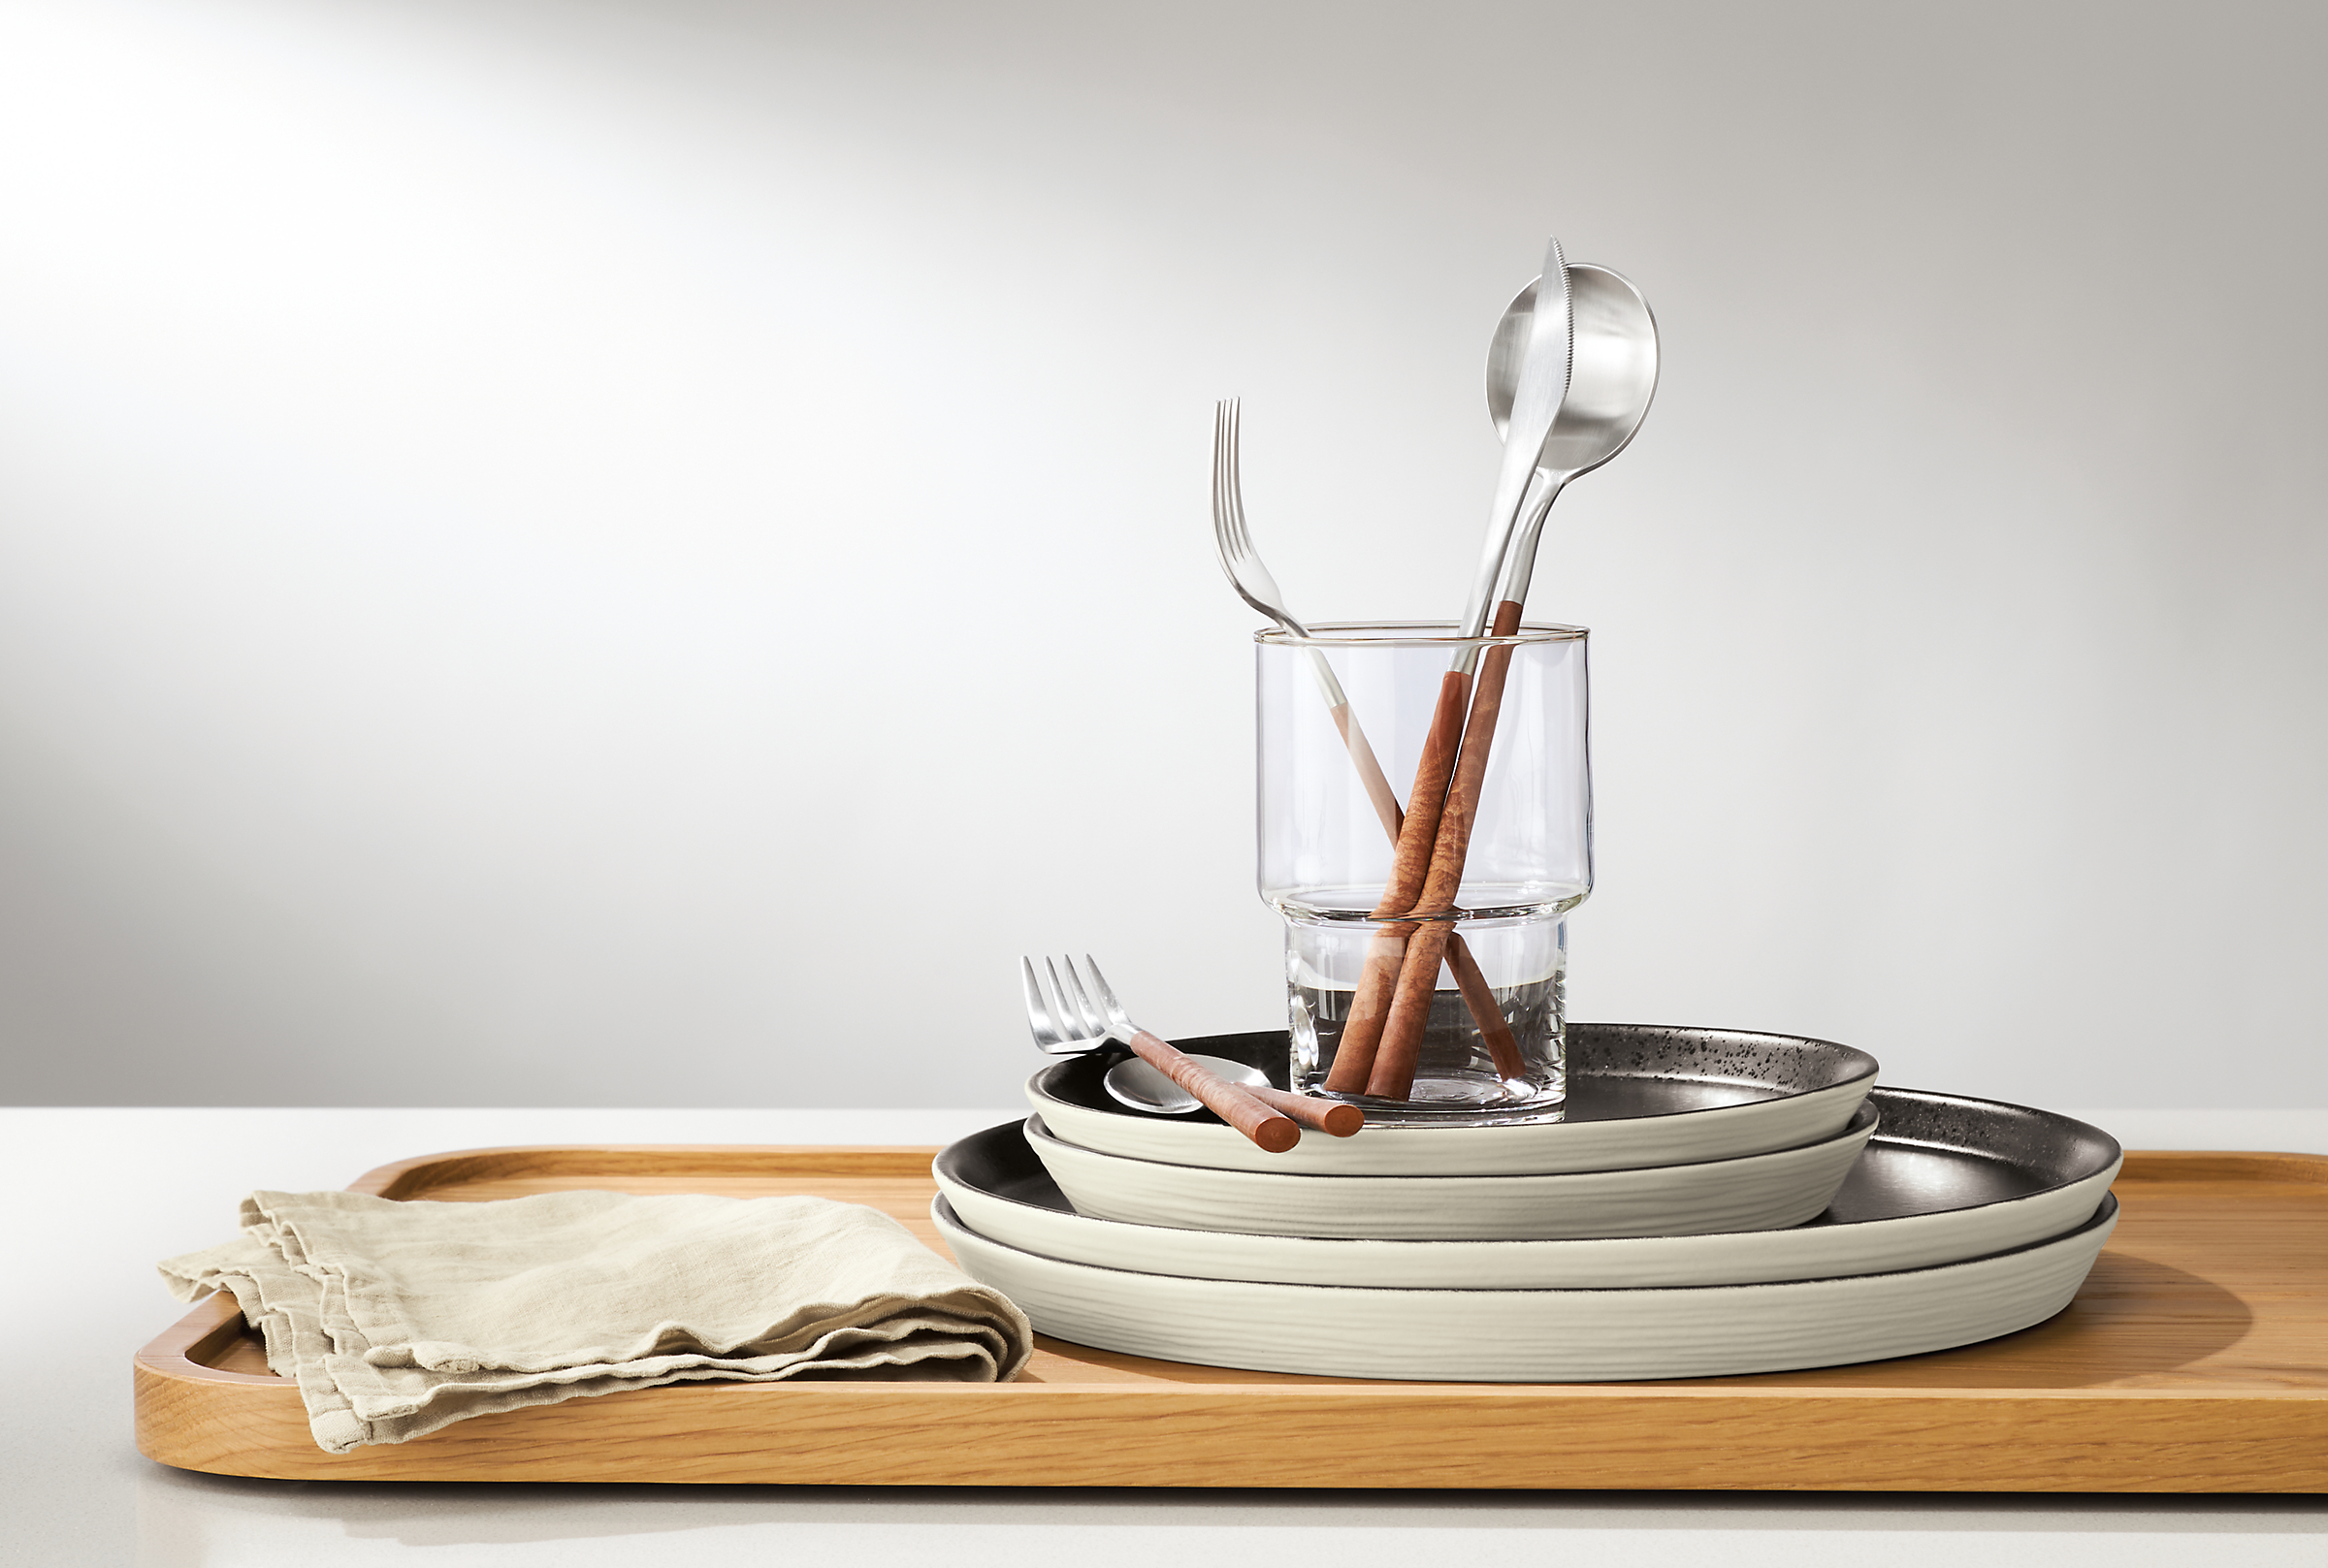 detail of notos plates and mito flatware on aspect wood tray.